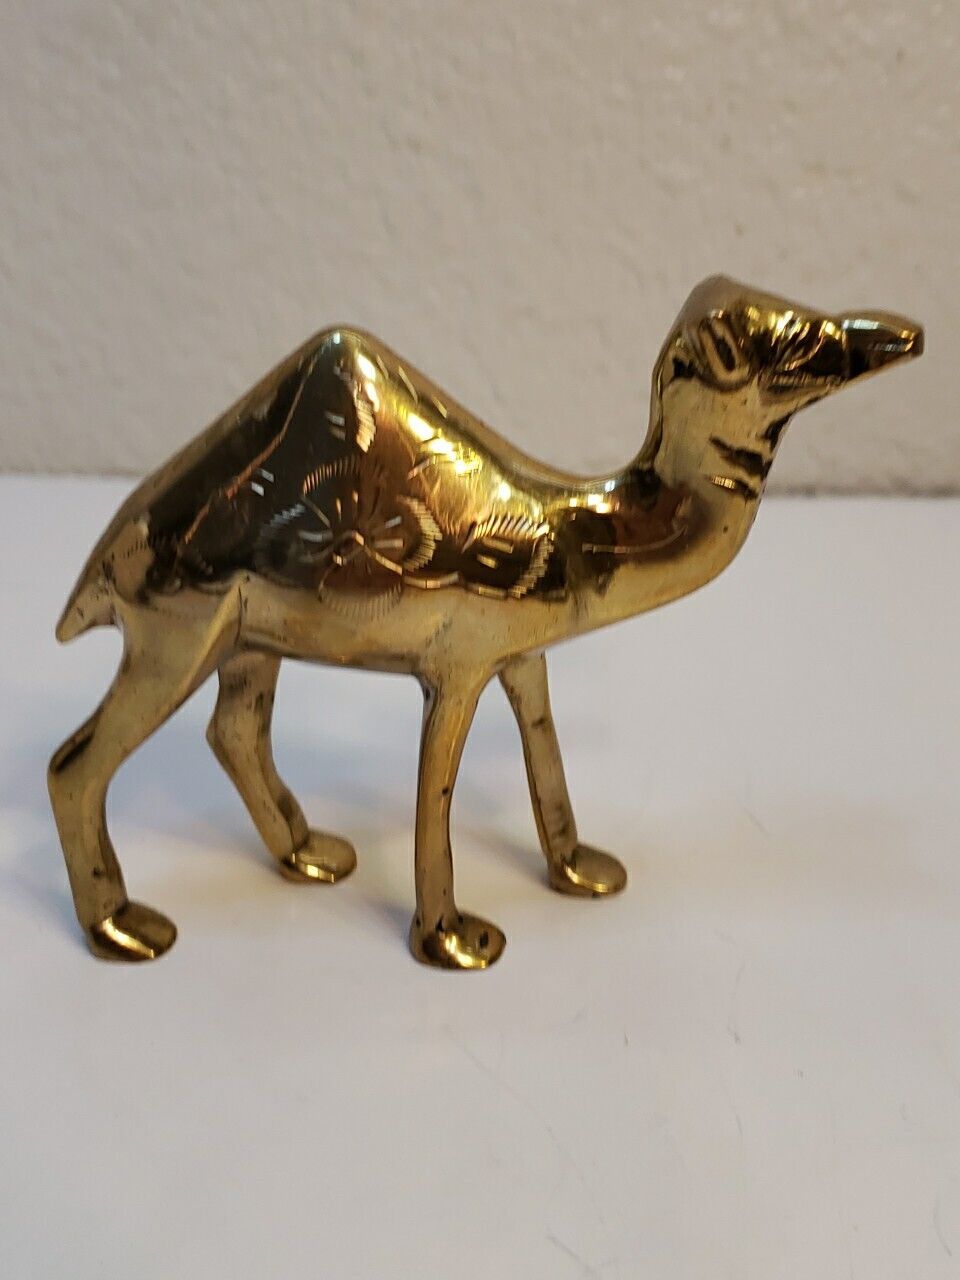 Vintage Handcrafted Brass Camel Figurine Statue Decorative  Made In India 4”x4”